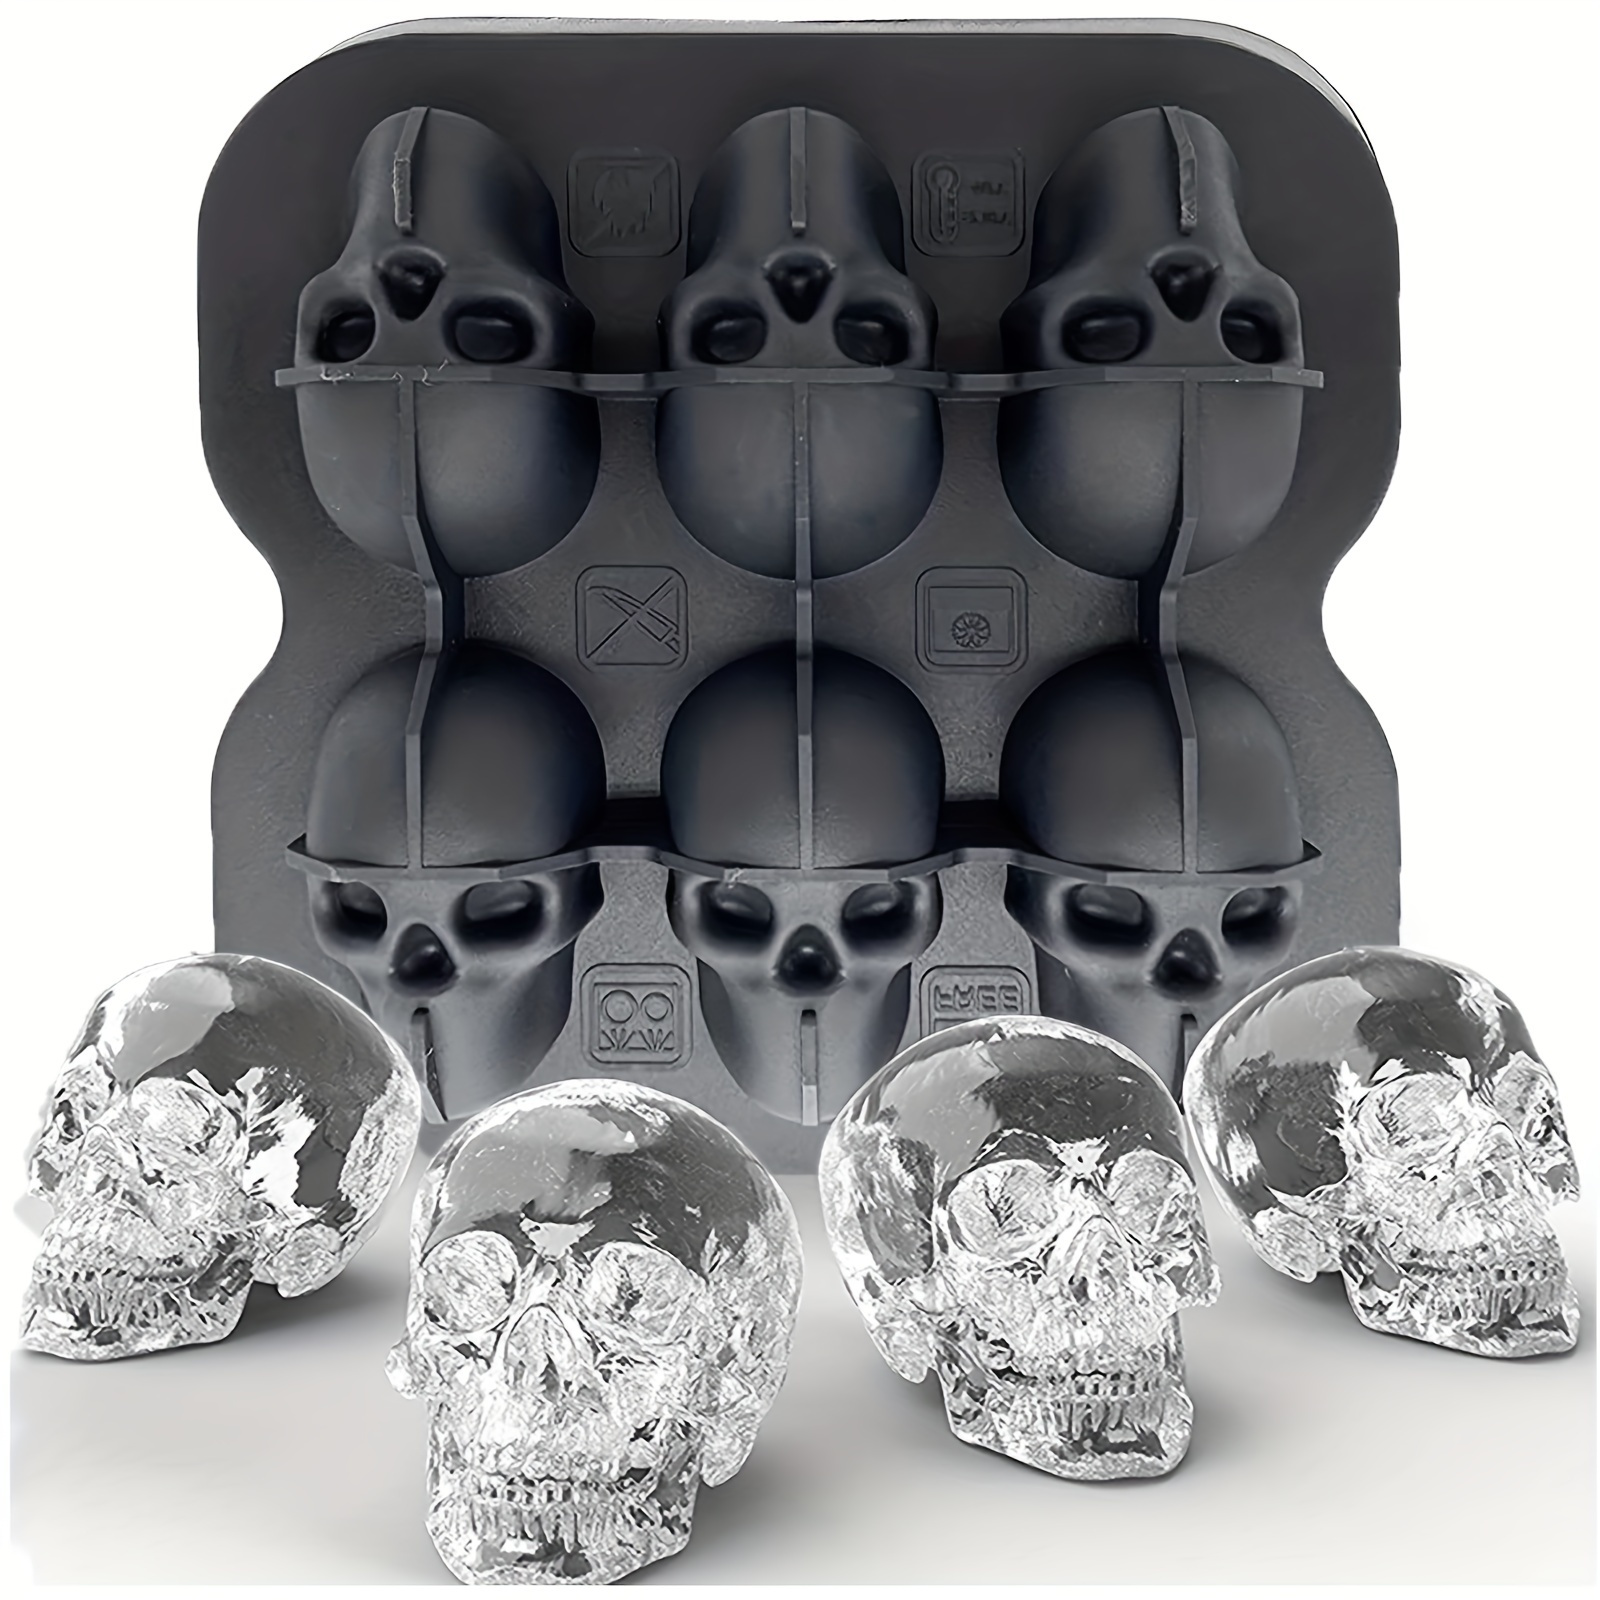 Tovolo Skull Ice Molds Review